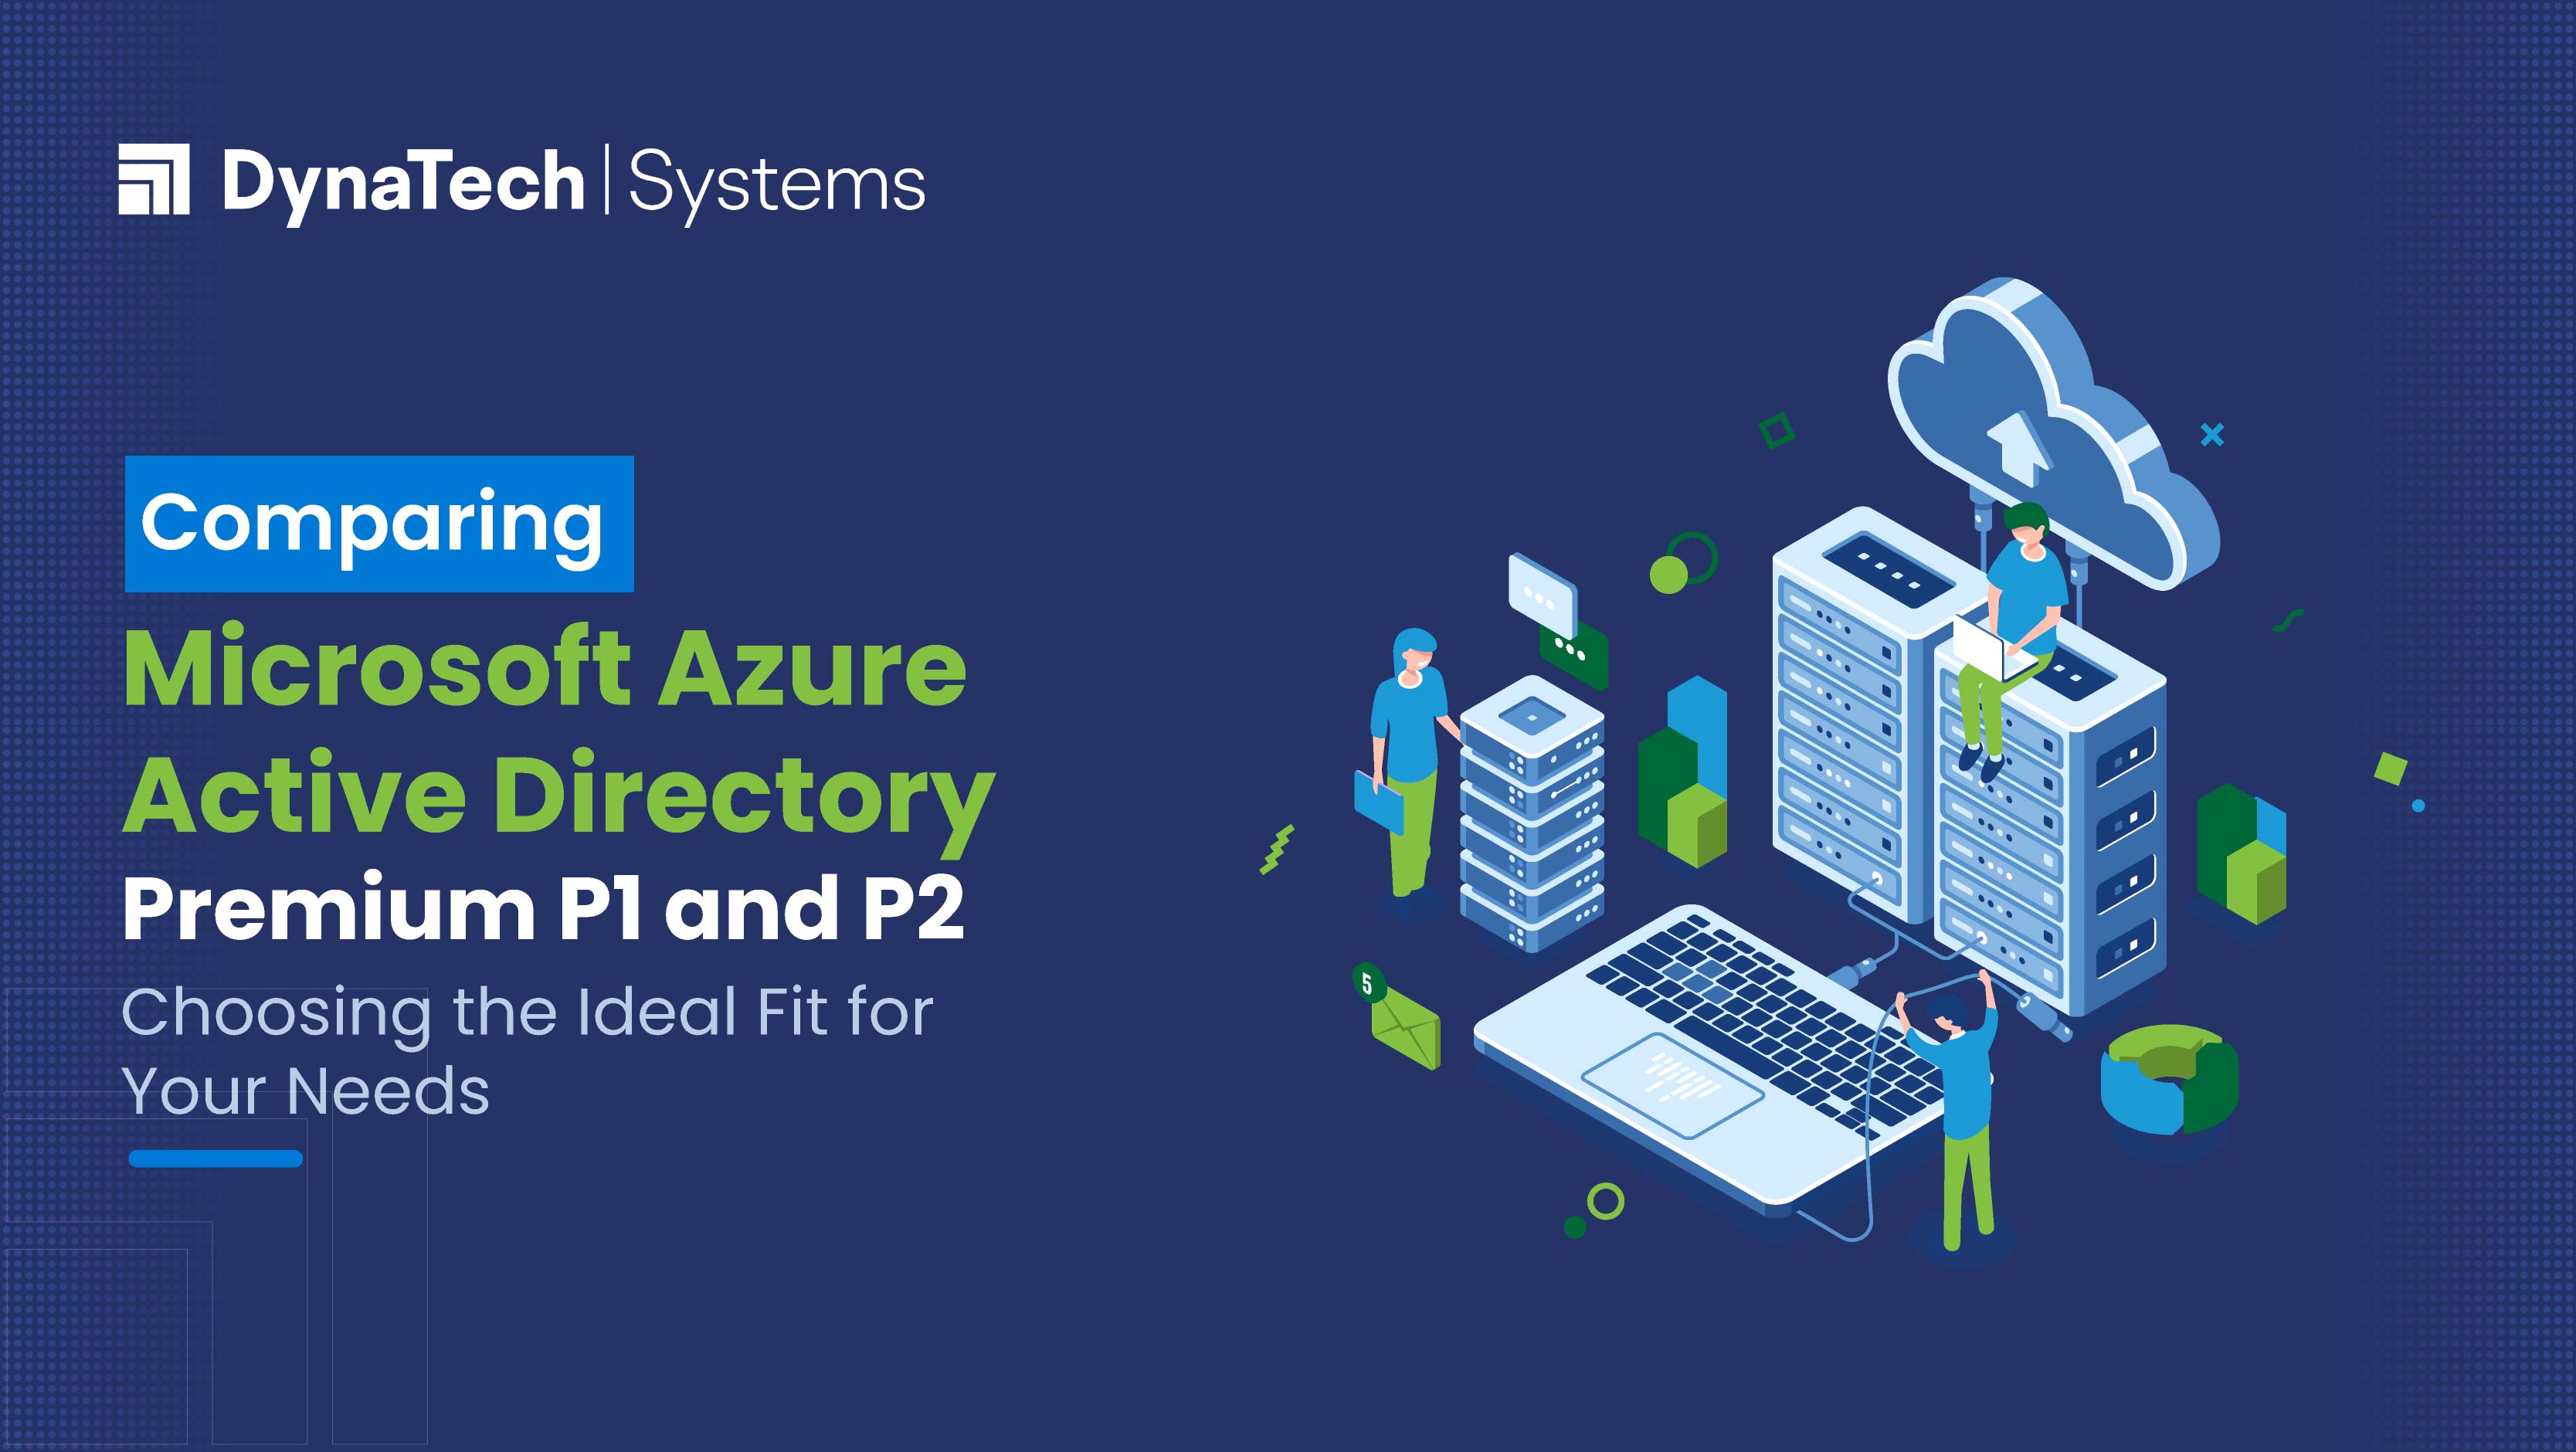 Comparing Microsoft Azure Active Directory (AD) Premium P1 and P2: Choosing the Ideal Fit for Your Needs